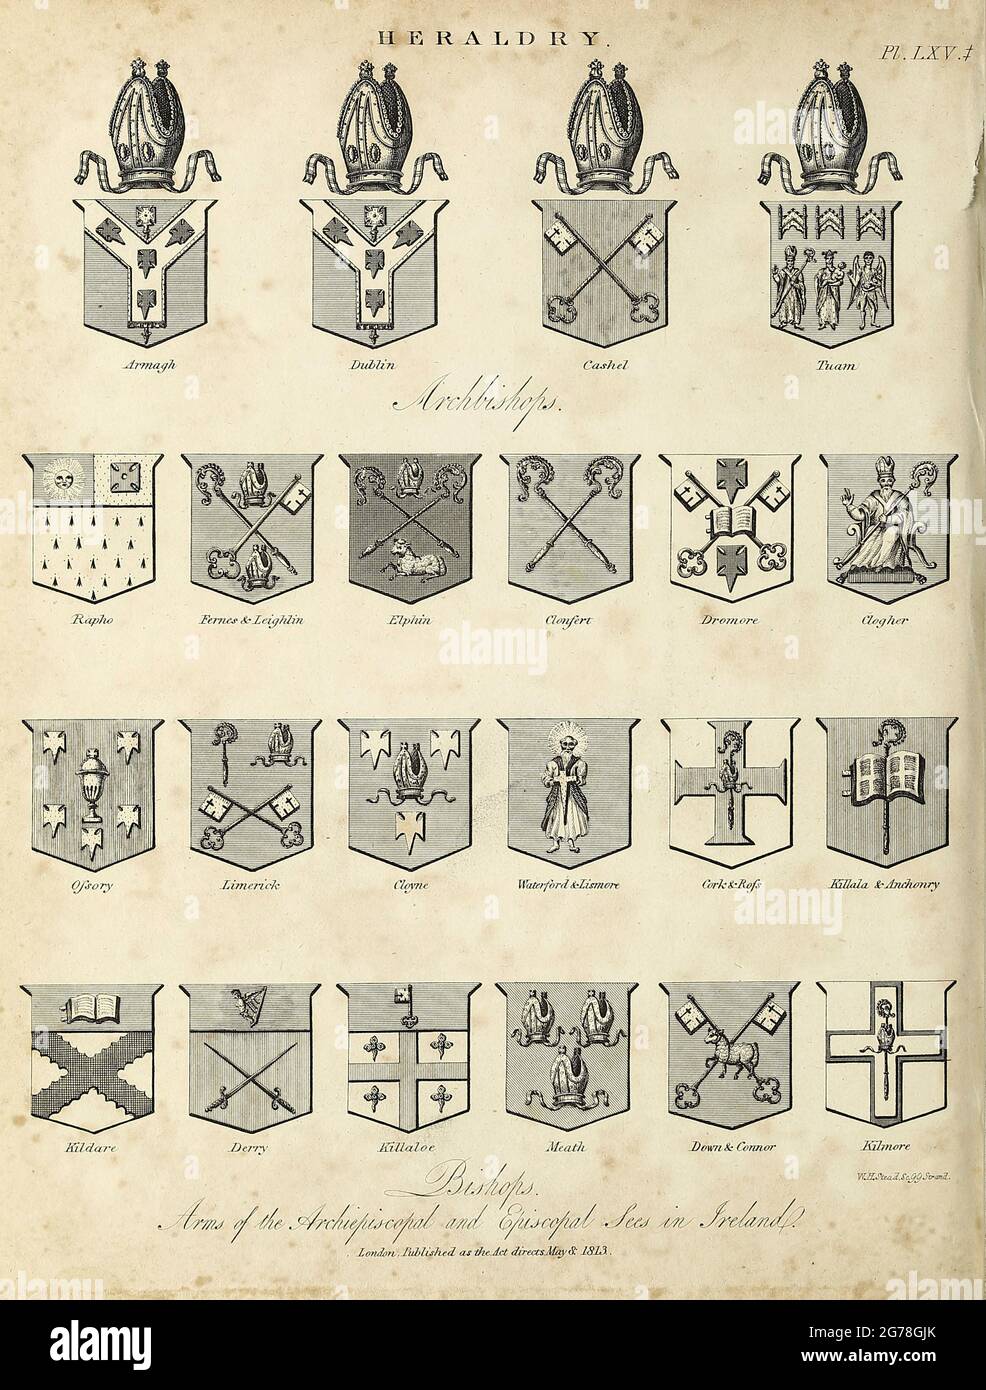 Bishops Heraldry is a discipline relating to the design, display and study of armorial bearings (known as armory), as well as related disciplines, such as vexillology, together with the study of ceremony, rank and pedigree. Armory, the best-known branch of heraldry, concerns the design and transmission of the heraldic achievement. The achievement, or armorial bearings usually includes a coat of arms on a shield, helmet and crest, together with any accompanying devices, such as supporters, badges, heraldic banners and mottoes. Copperplate engraving From the Encyclopaedia Londinensis or, Univers Stock Photo